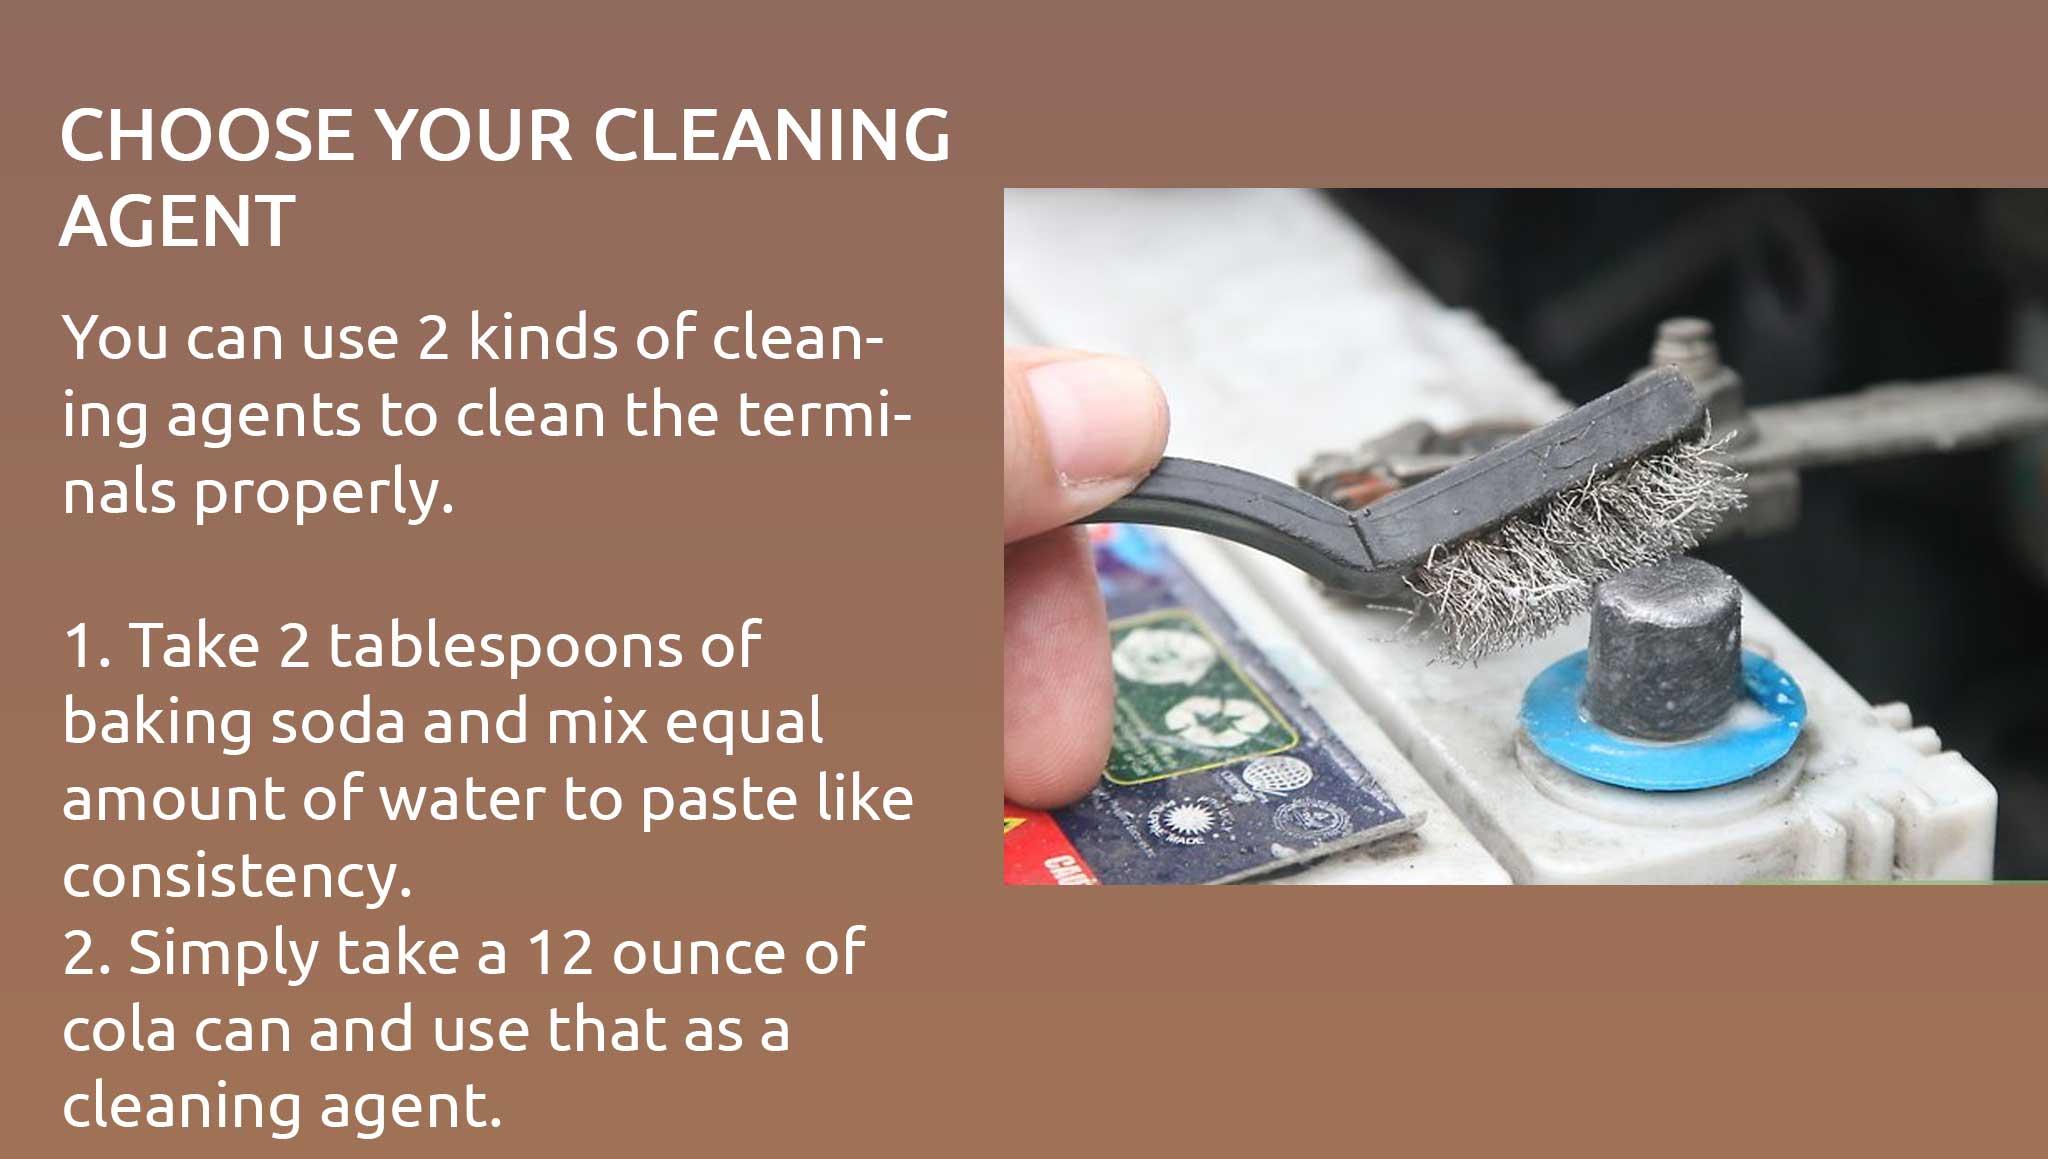 You can use 2 kinds of cleaning agents to clean the terminals properly.  1. Take 2 tablespoons of baking soda and mix equal amount of water to paste like consistency. 2. Simply take a 12 ounce of cola can and use that as a cleaning agent.